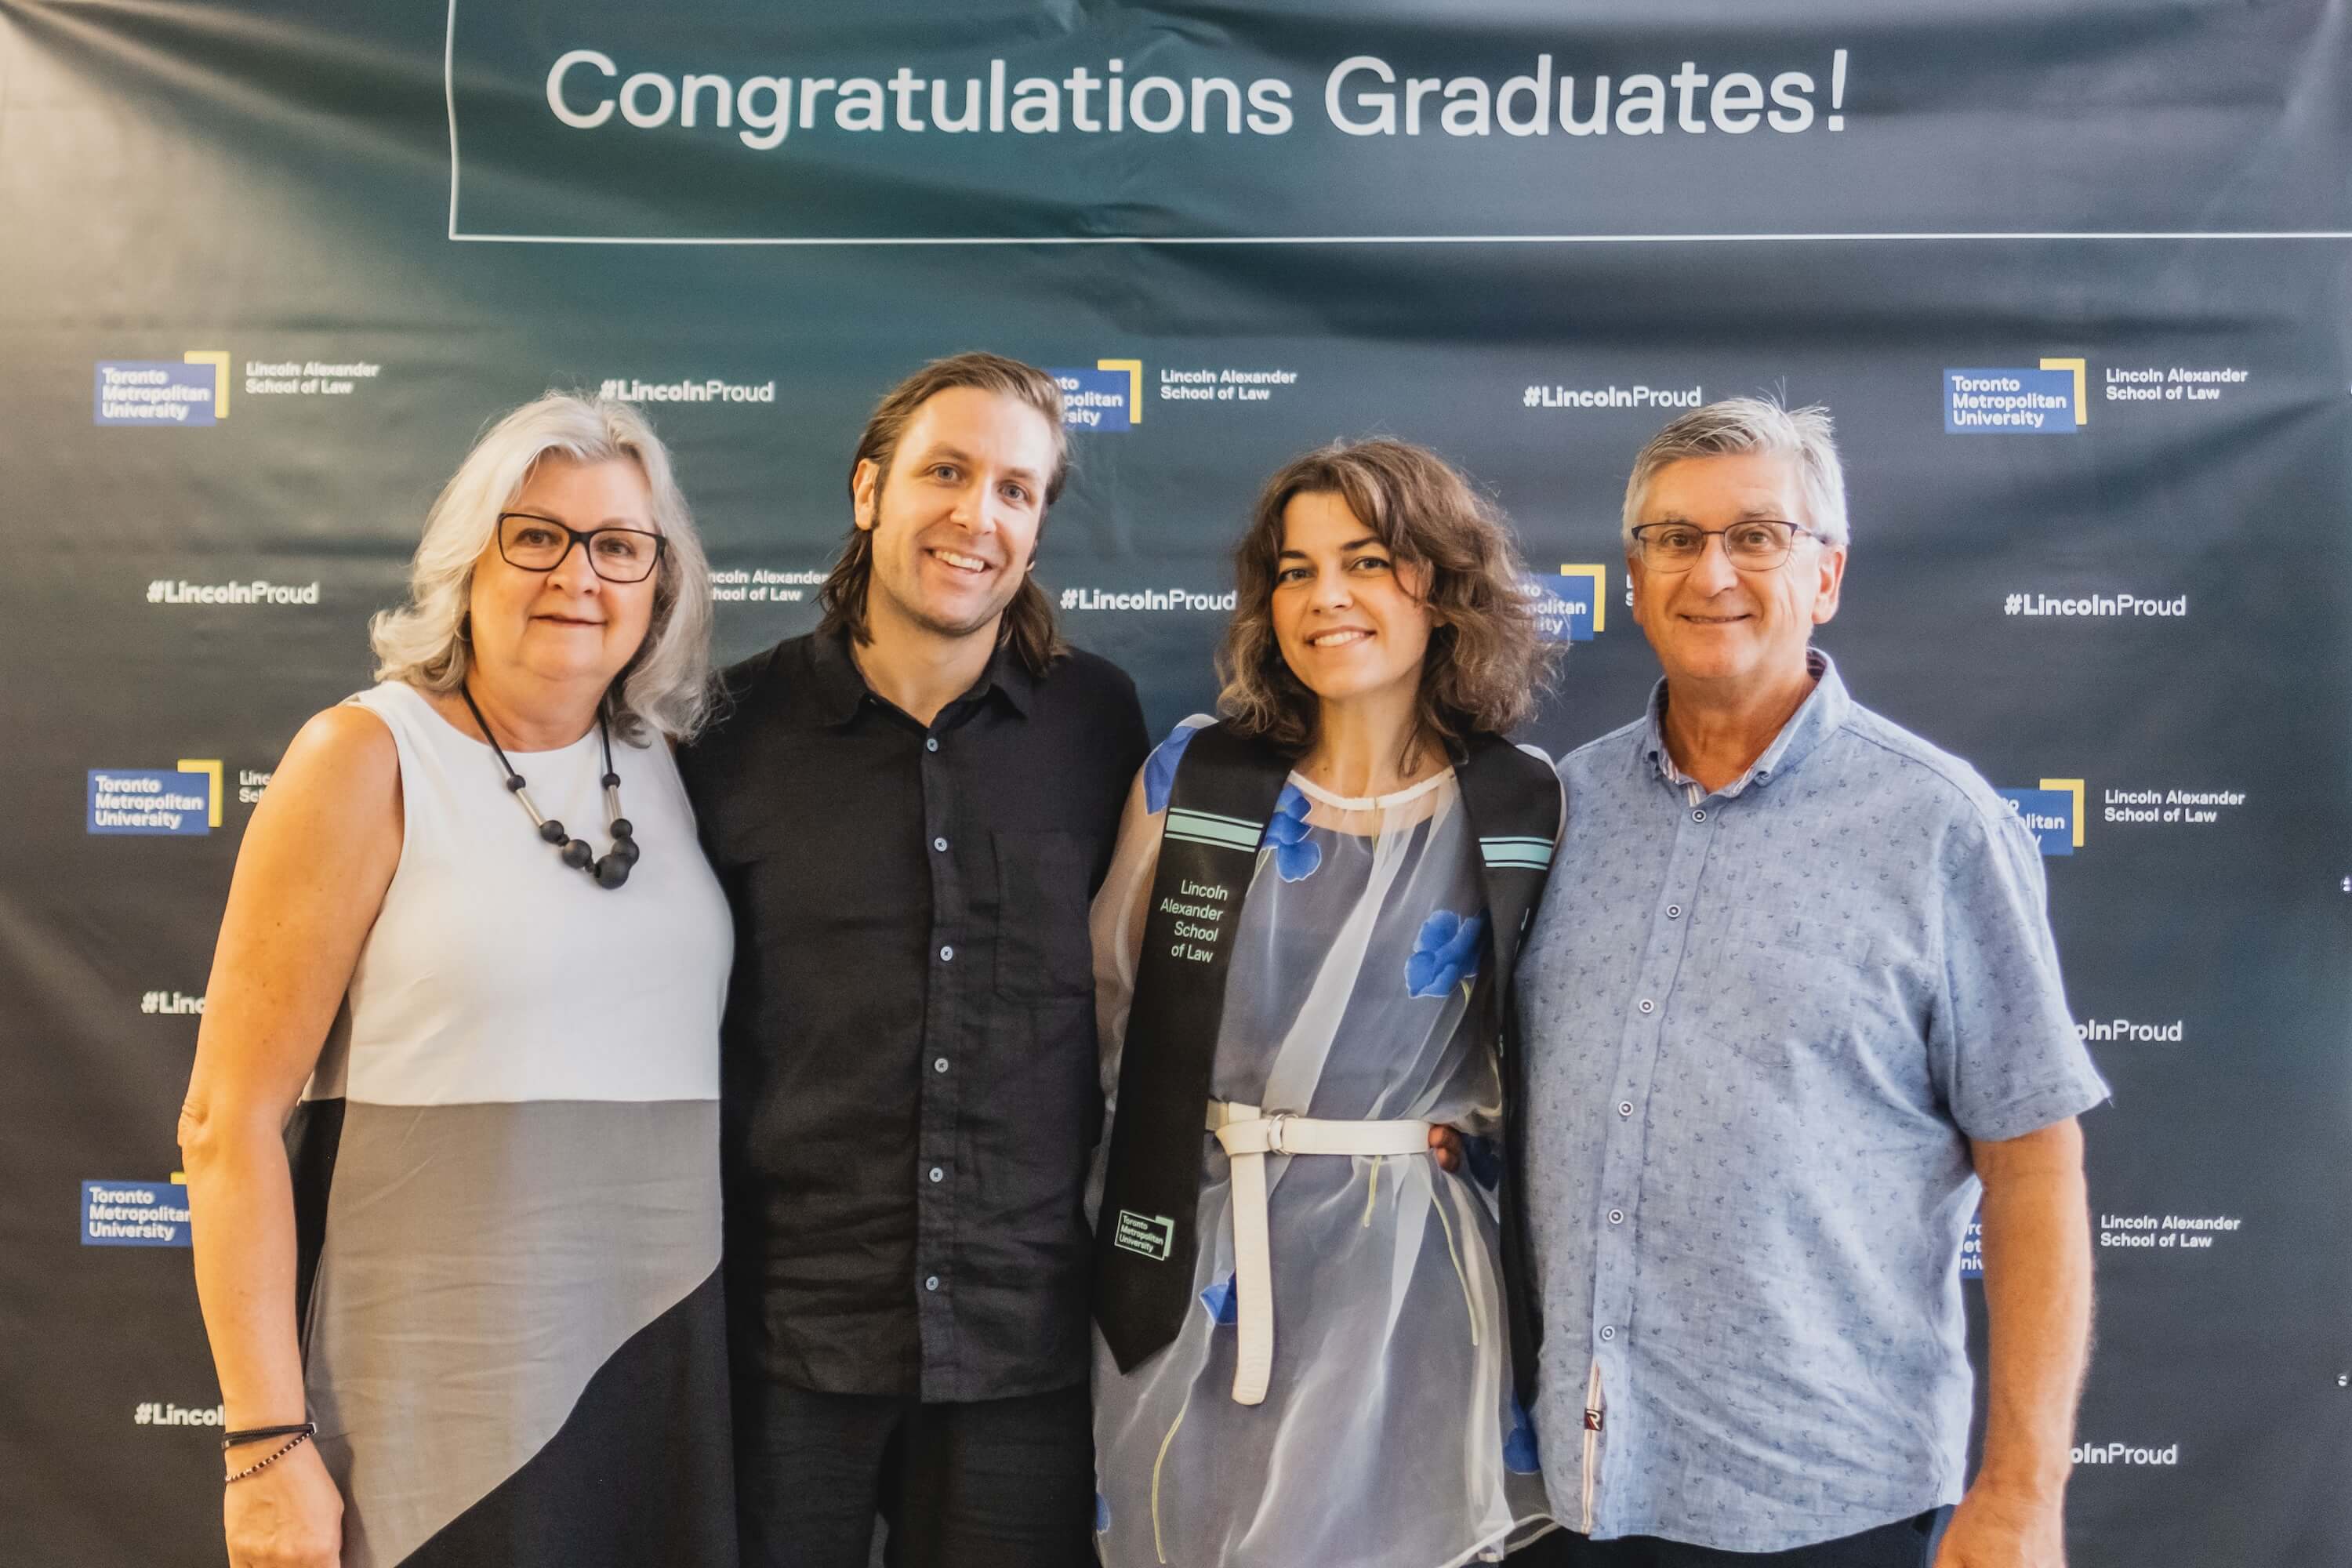 Two men and two women, one a graduating student, pose for a photo in front of a backdrop that says "Congratulations Graduates!"